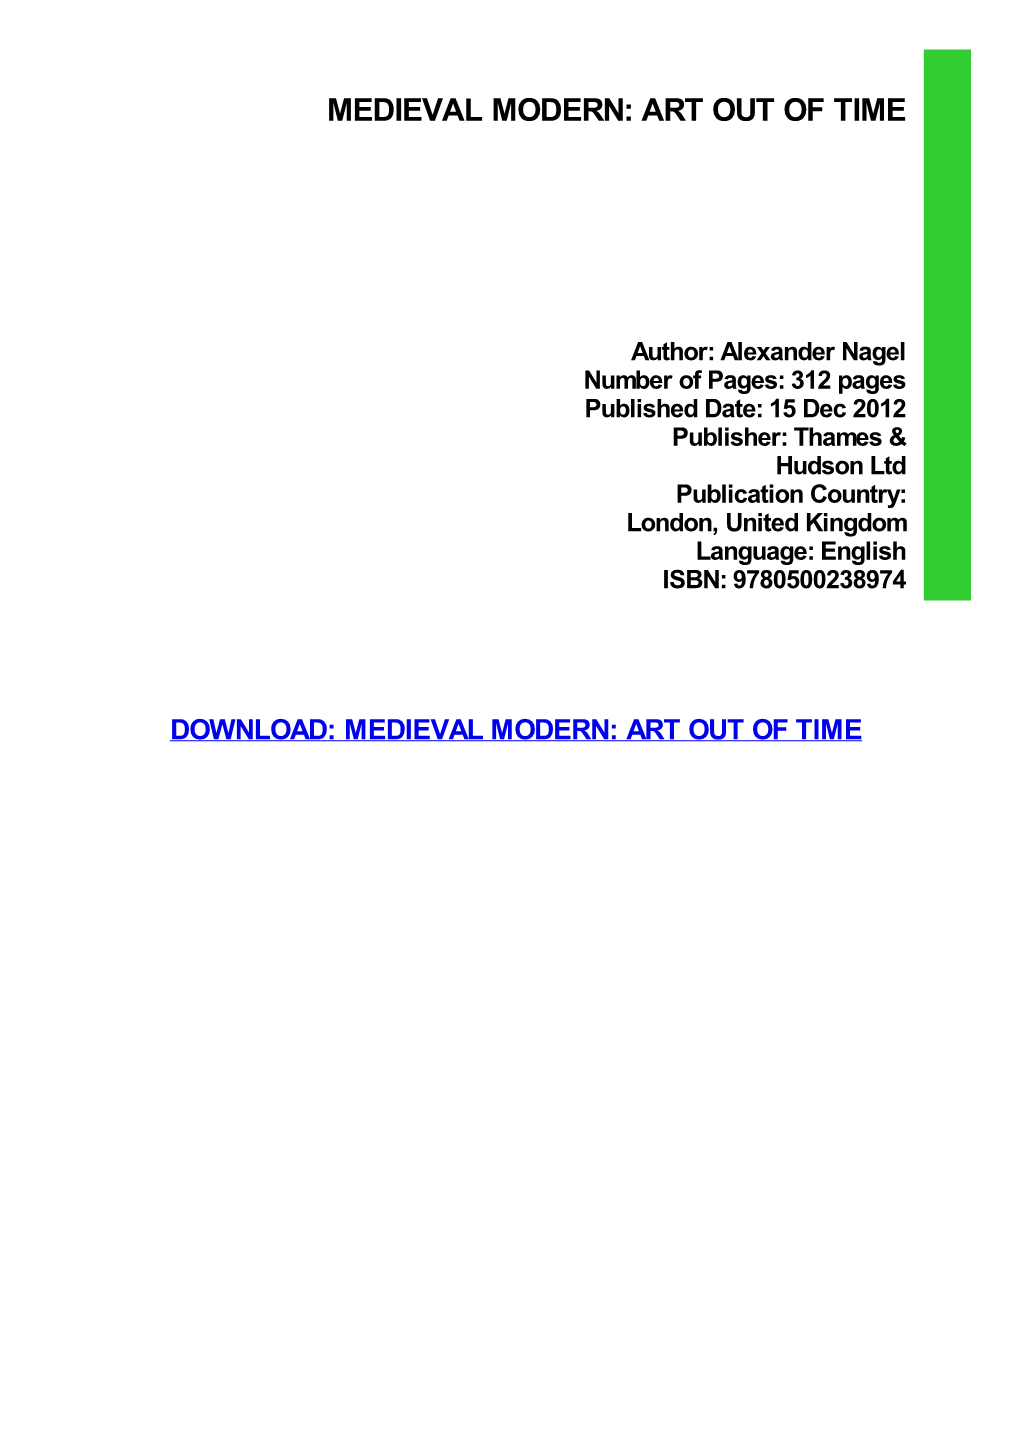 Medieval Modern: Art out of Time